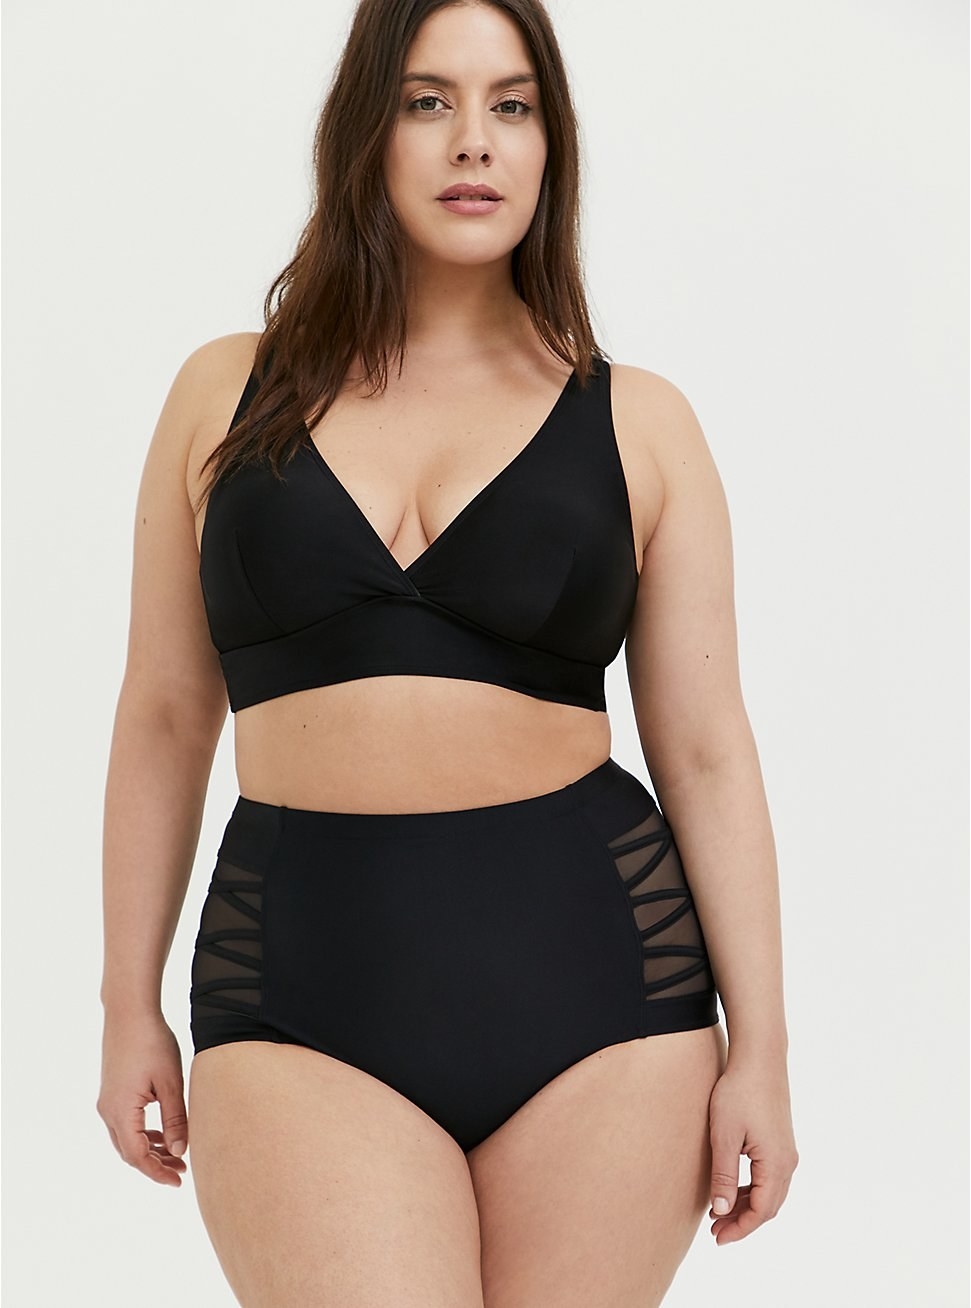 My Go-To Swimwear for Bigger Boobs - Diary of a Fit Mommy